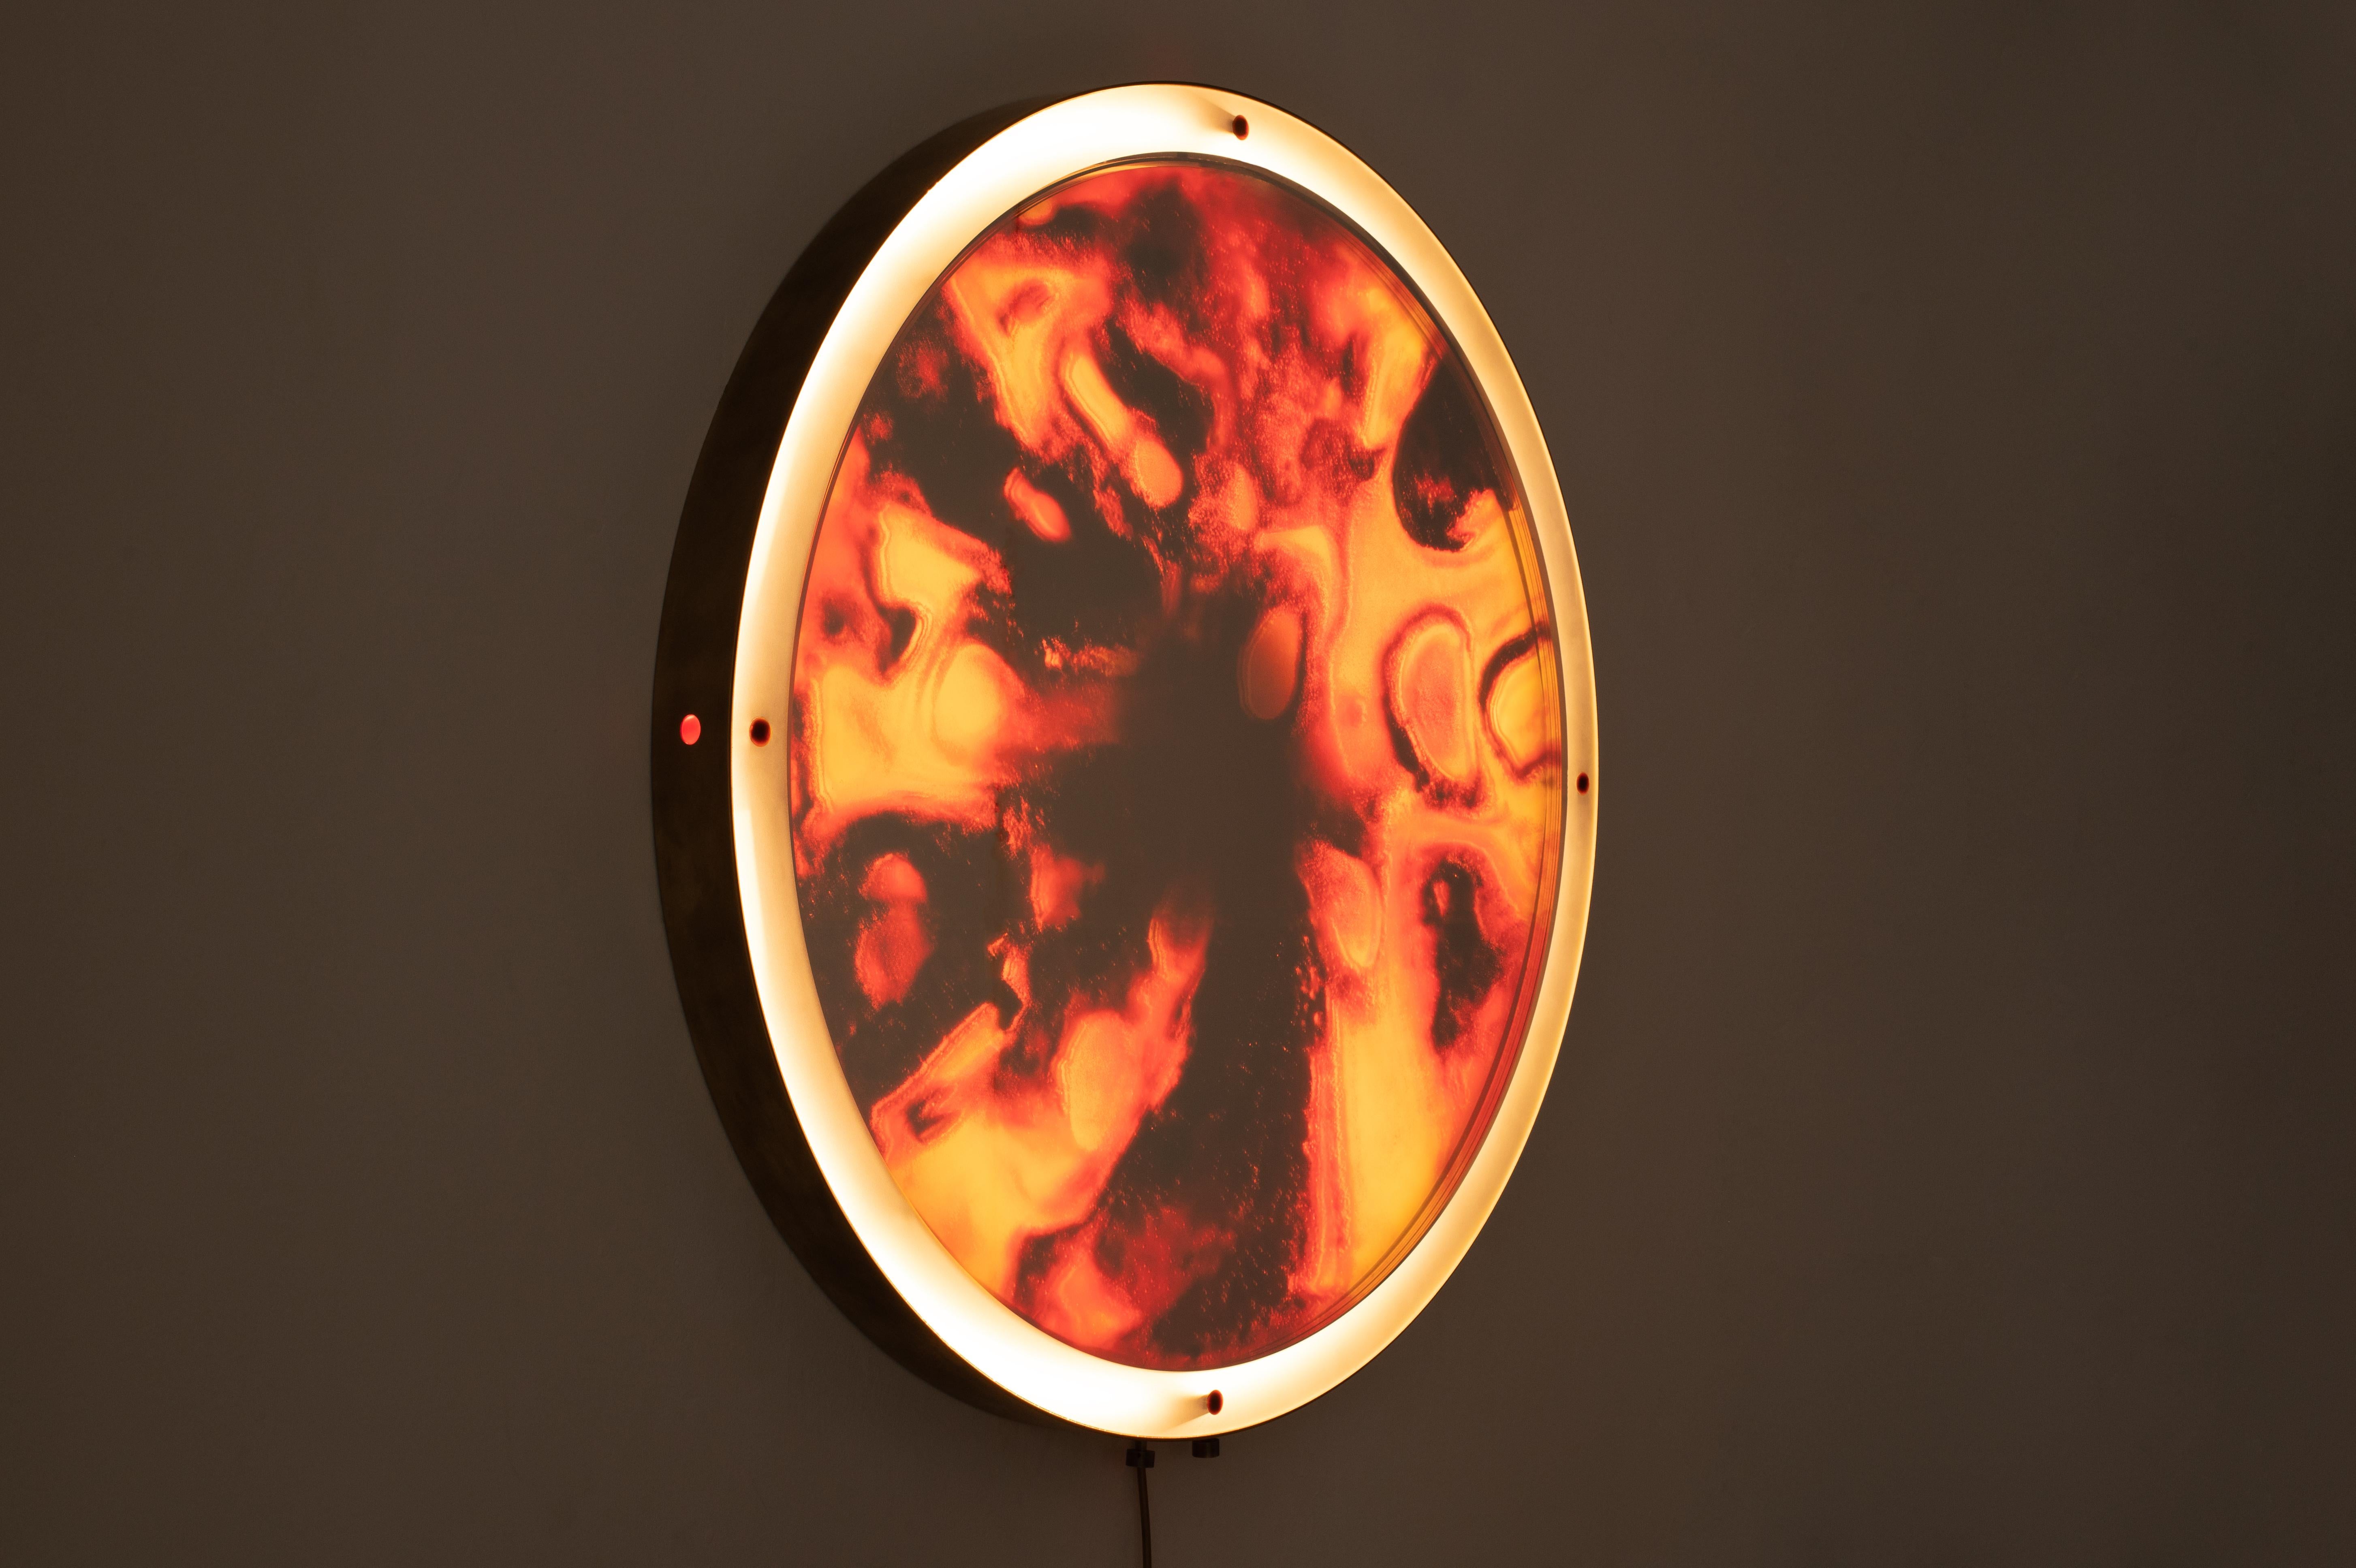 At first glance, the Event Horizon Mirror seems like an ordinary looking glass. Its left-hand knob illuminates an outer vanity ring, allowing one to view their reflection. Turning its right-hand knob, however, causes all reflectivity to vanish,